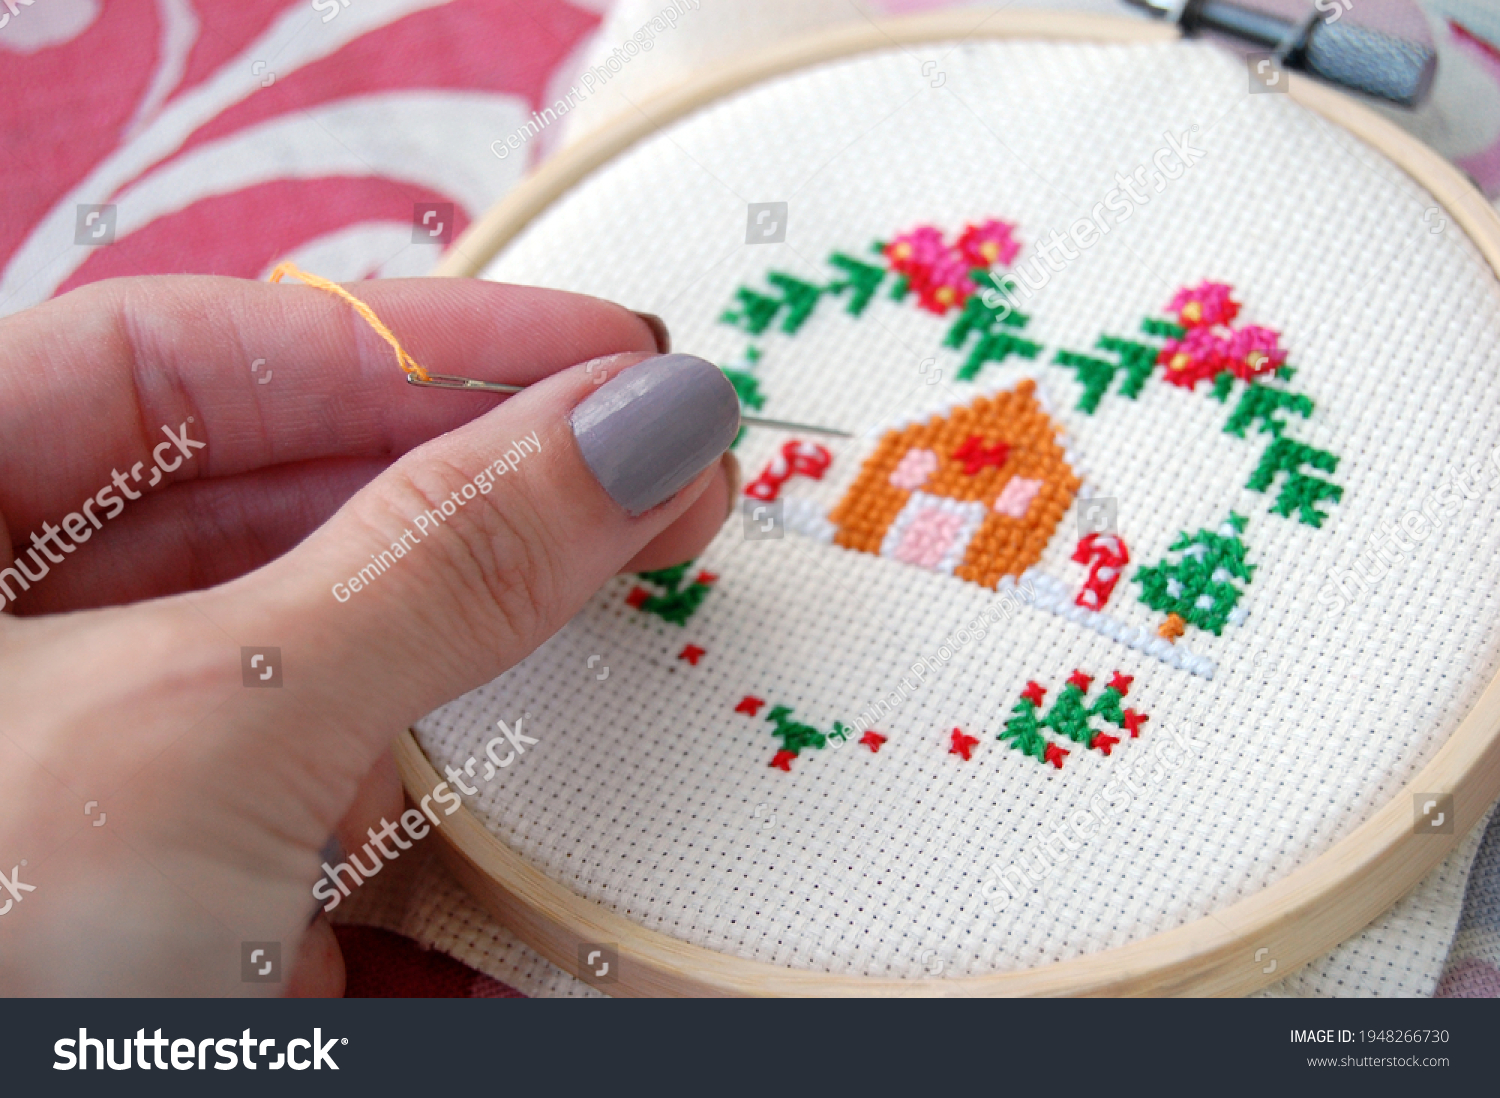 Cross stitching hobby with needle and thread #1948266730